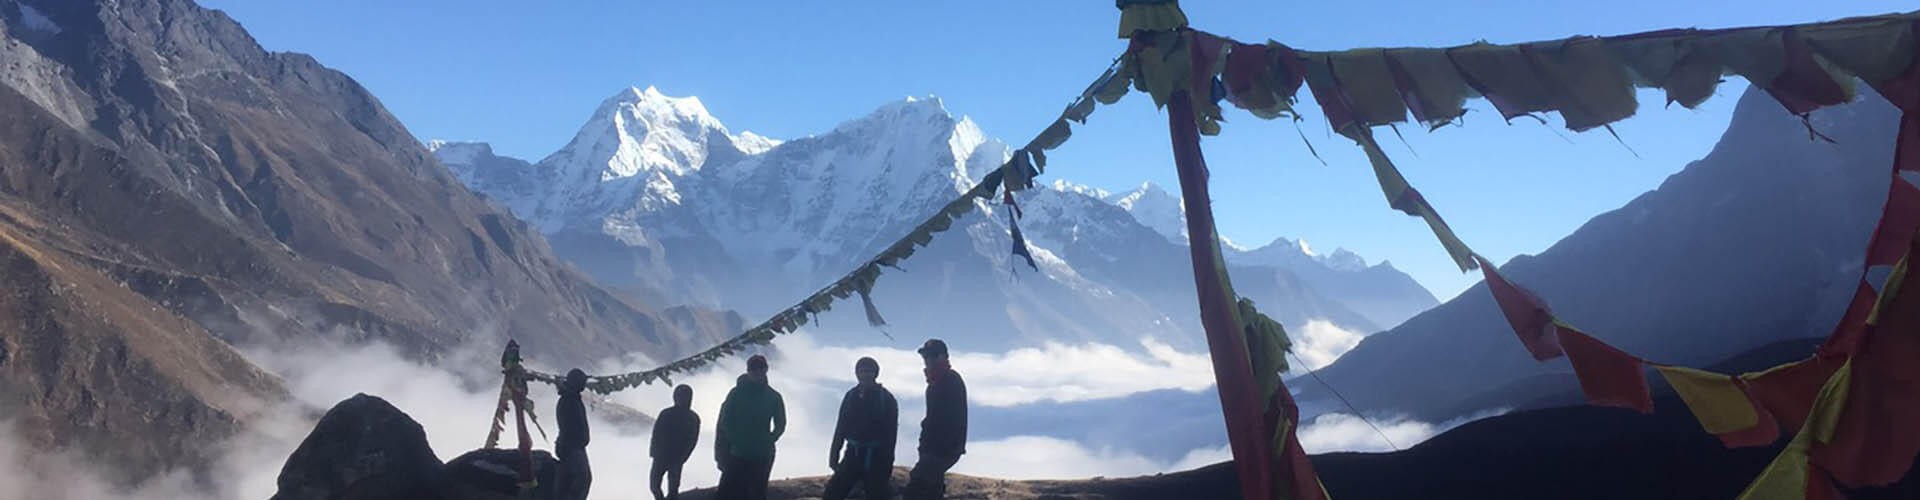 Tourist arrival in Nepal in 2018